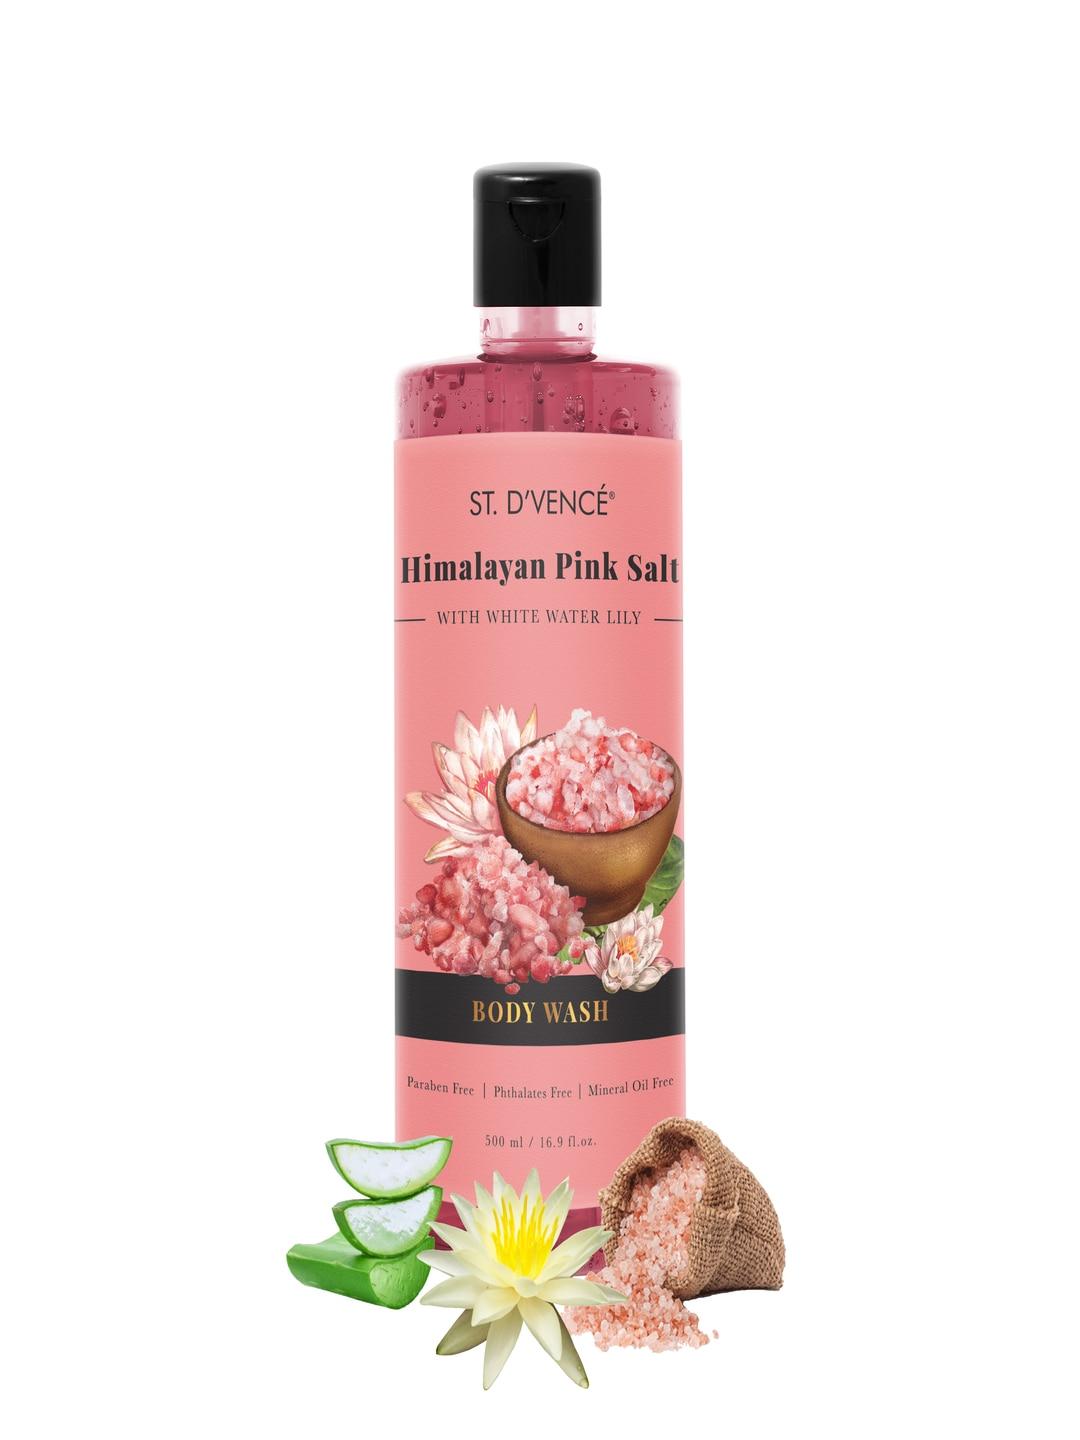 ST. DVENCE Unisex Himalayan Pink Salt with White Water Lily Body Wash 500 ml